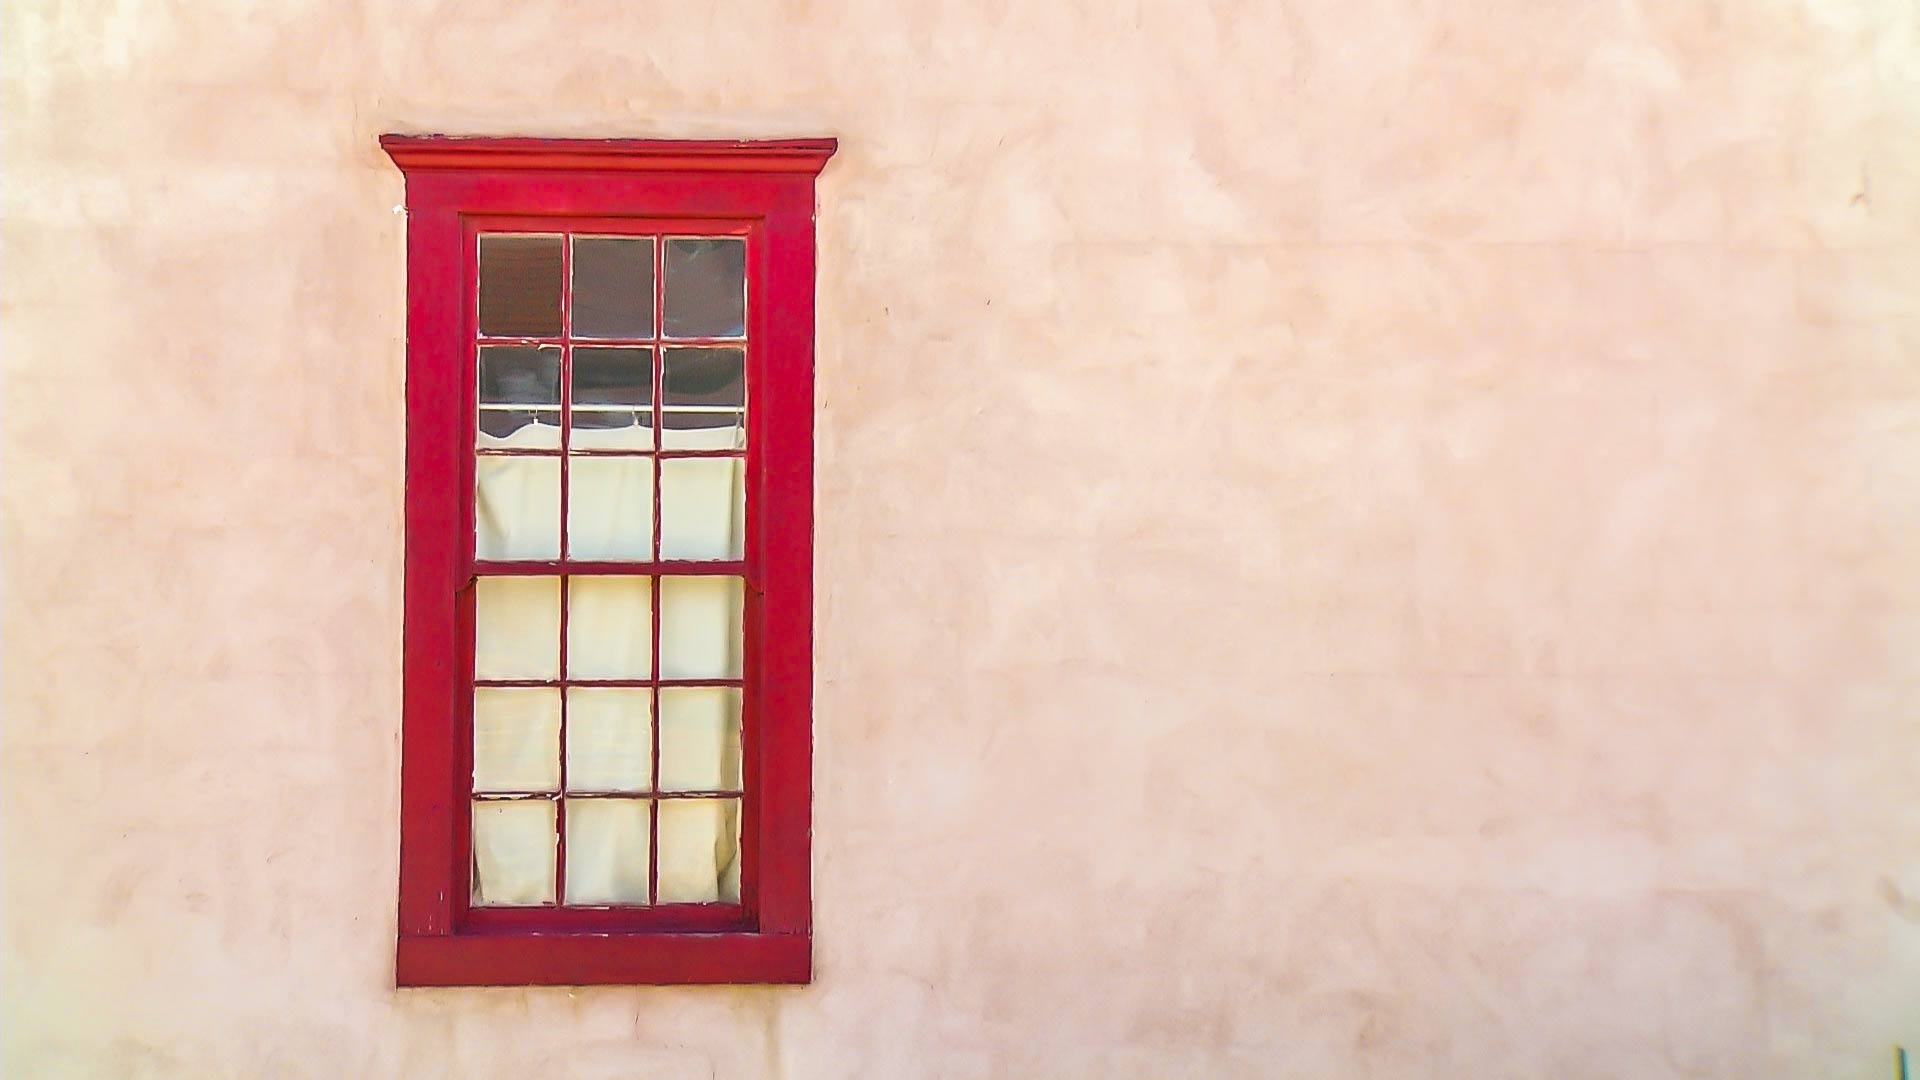 The window of a house in Tucson's Barrio Viejo.